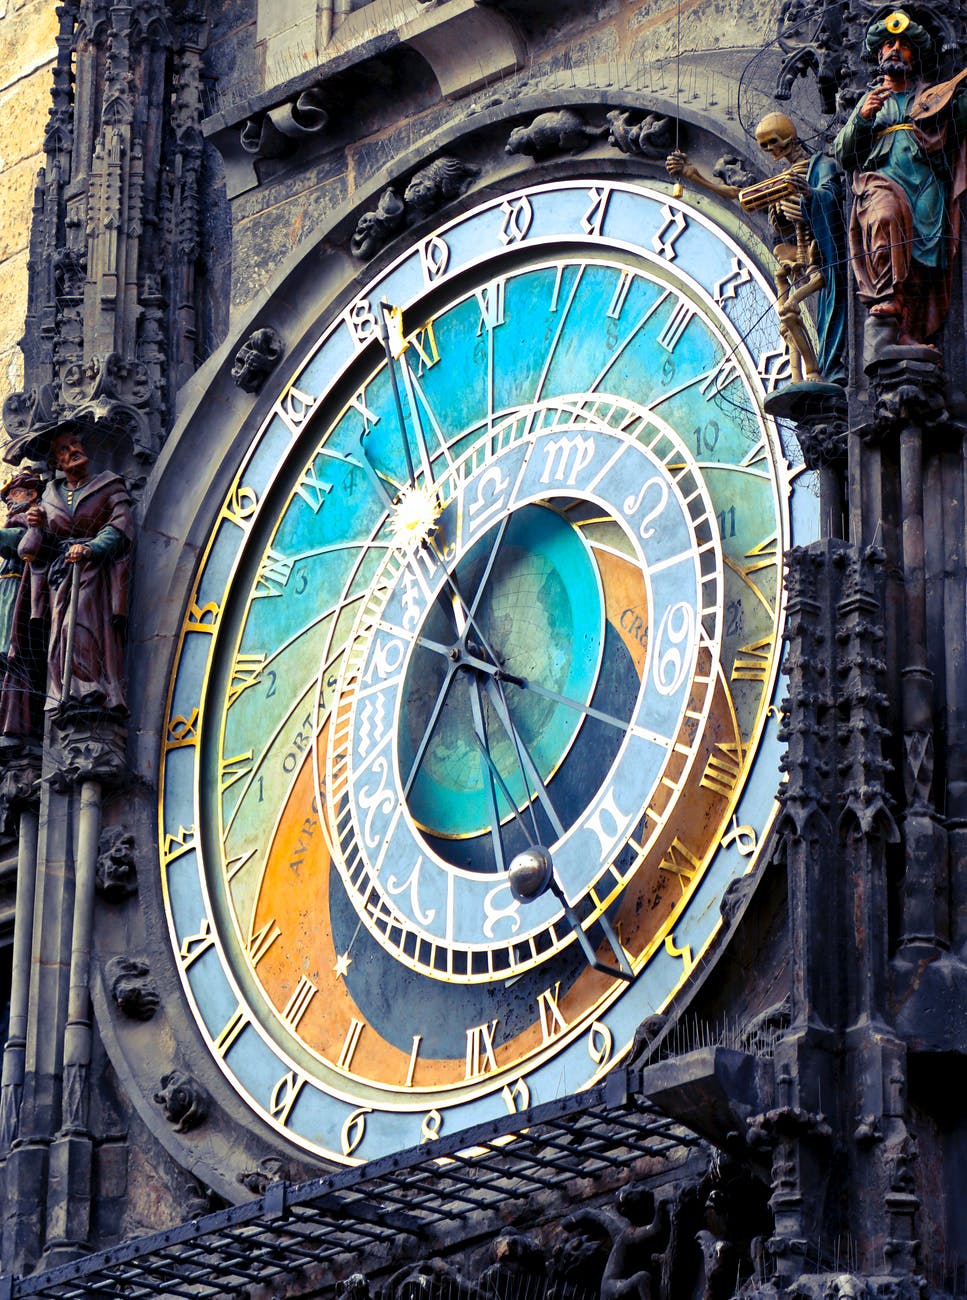 Learning about the History of Astrology - Astrologyical Clock in Prague